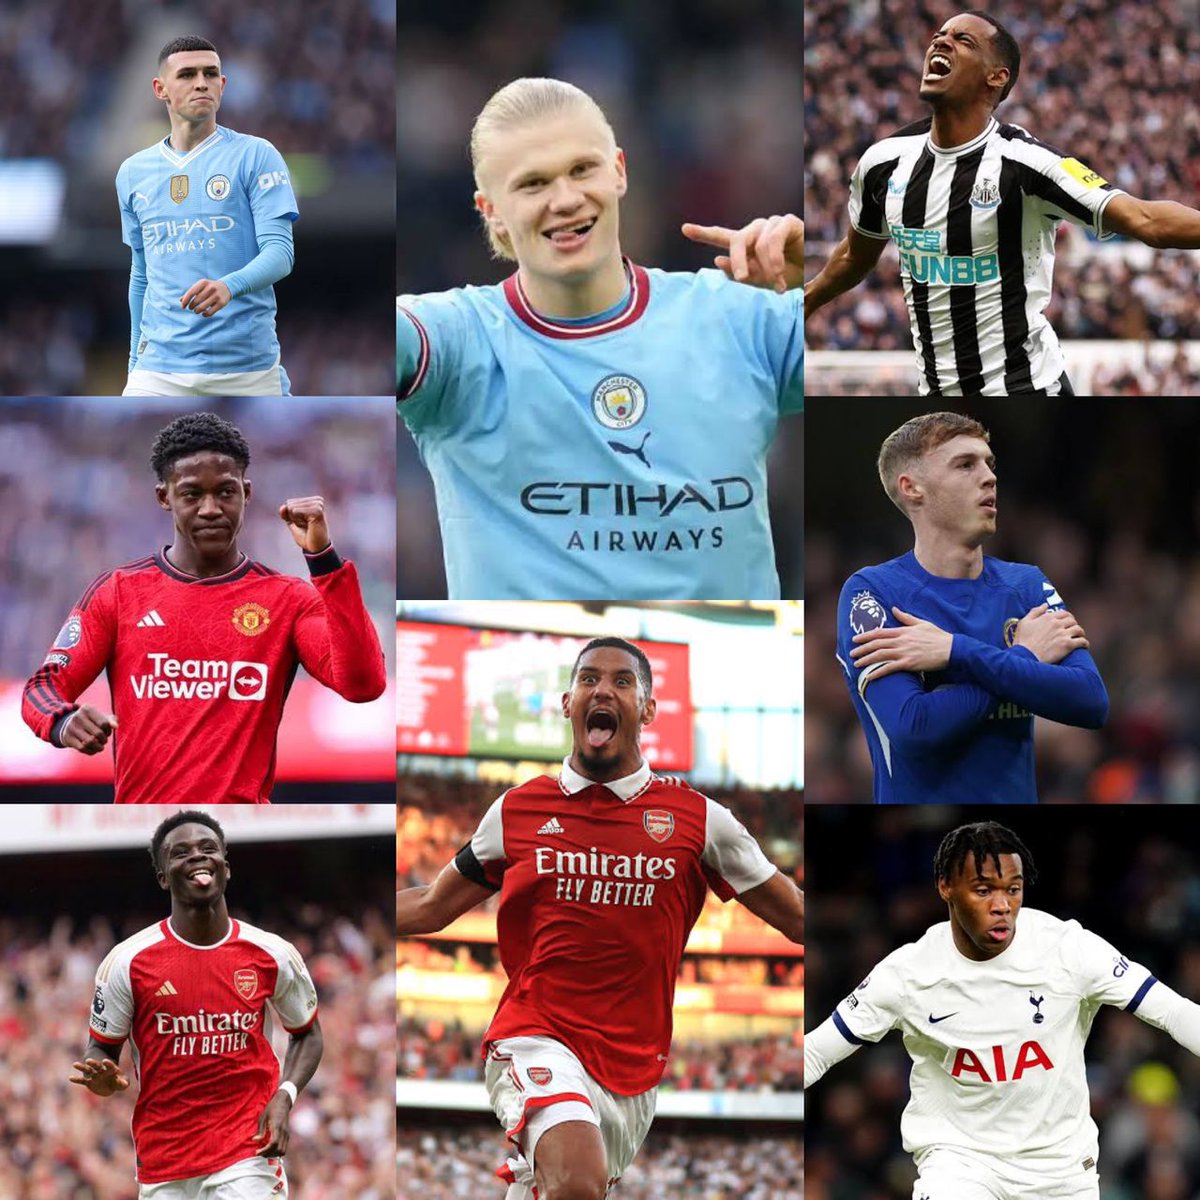 The nominees for the Premier League Young Player of the Season Who are you voting for?